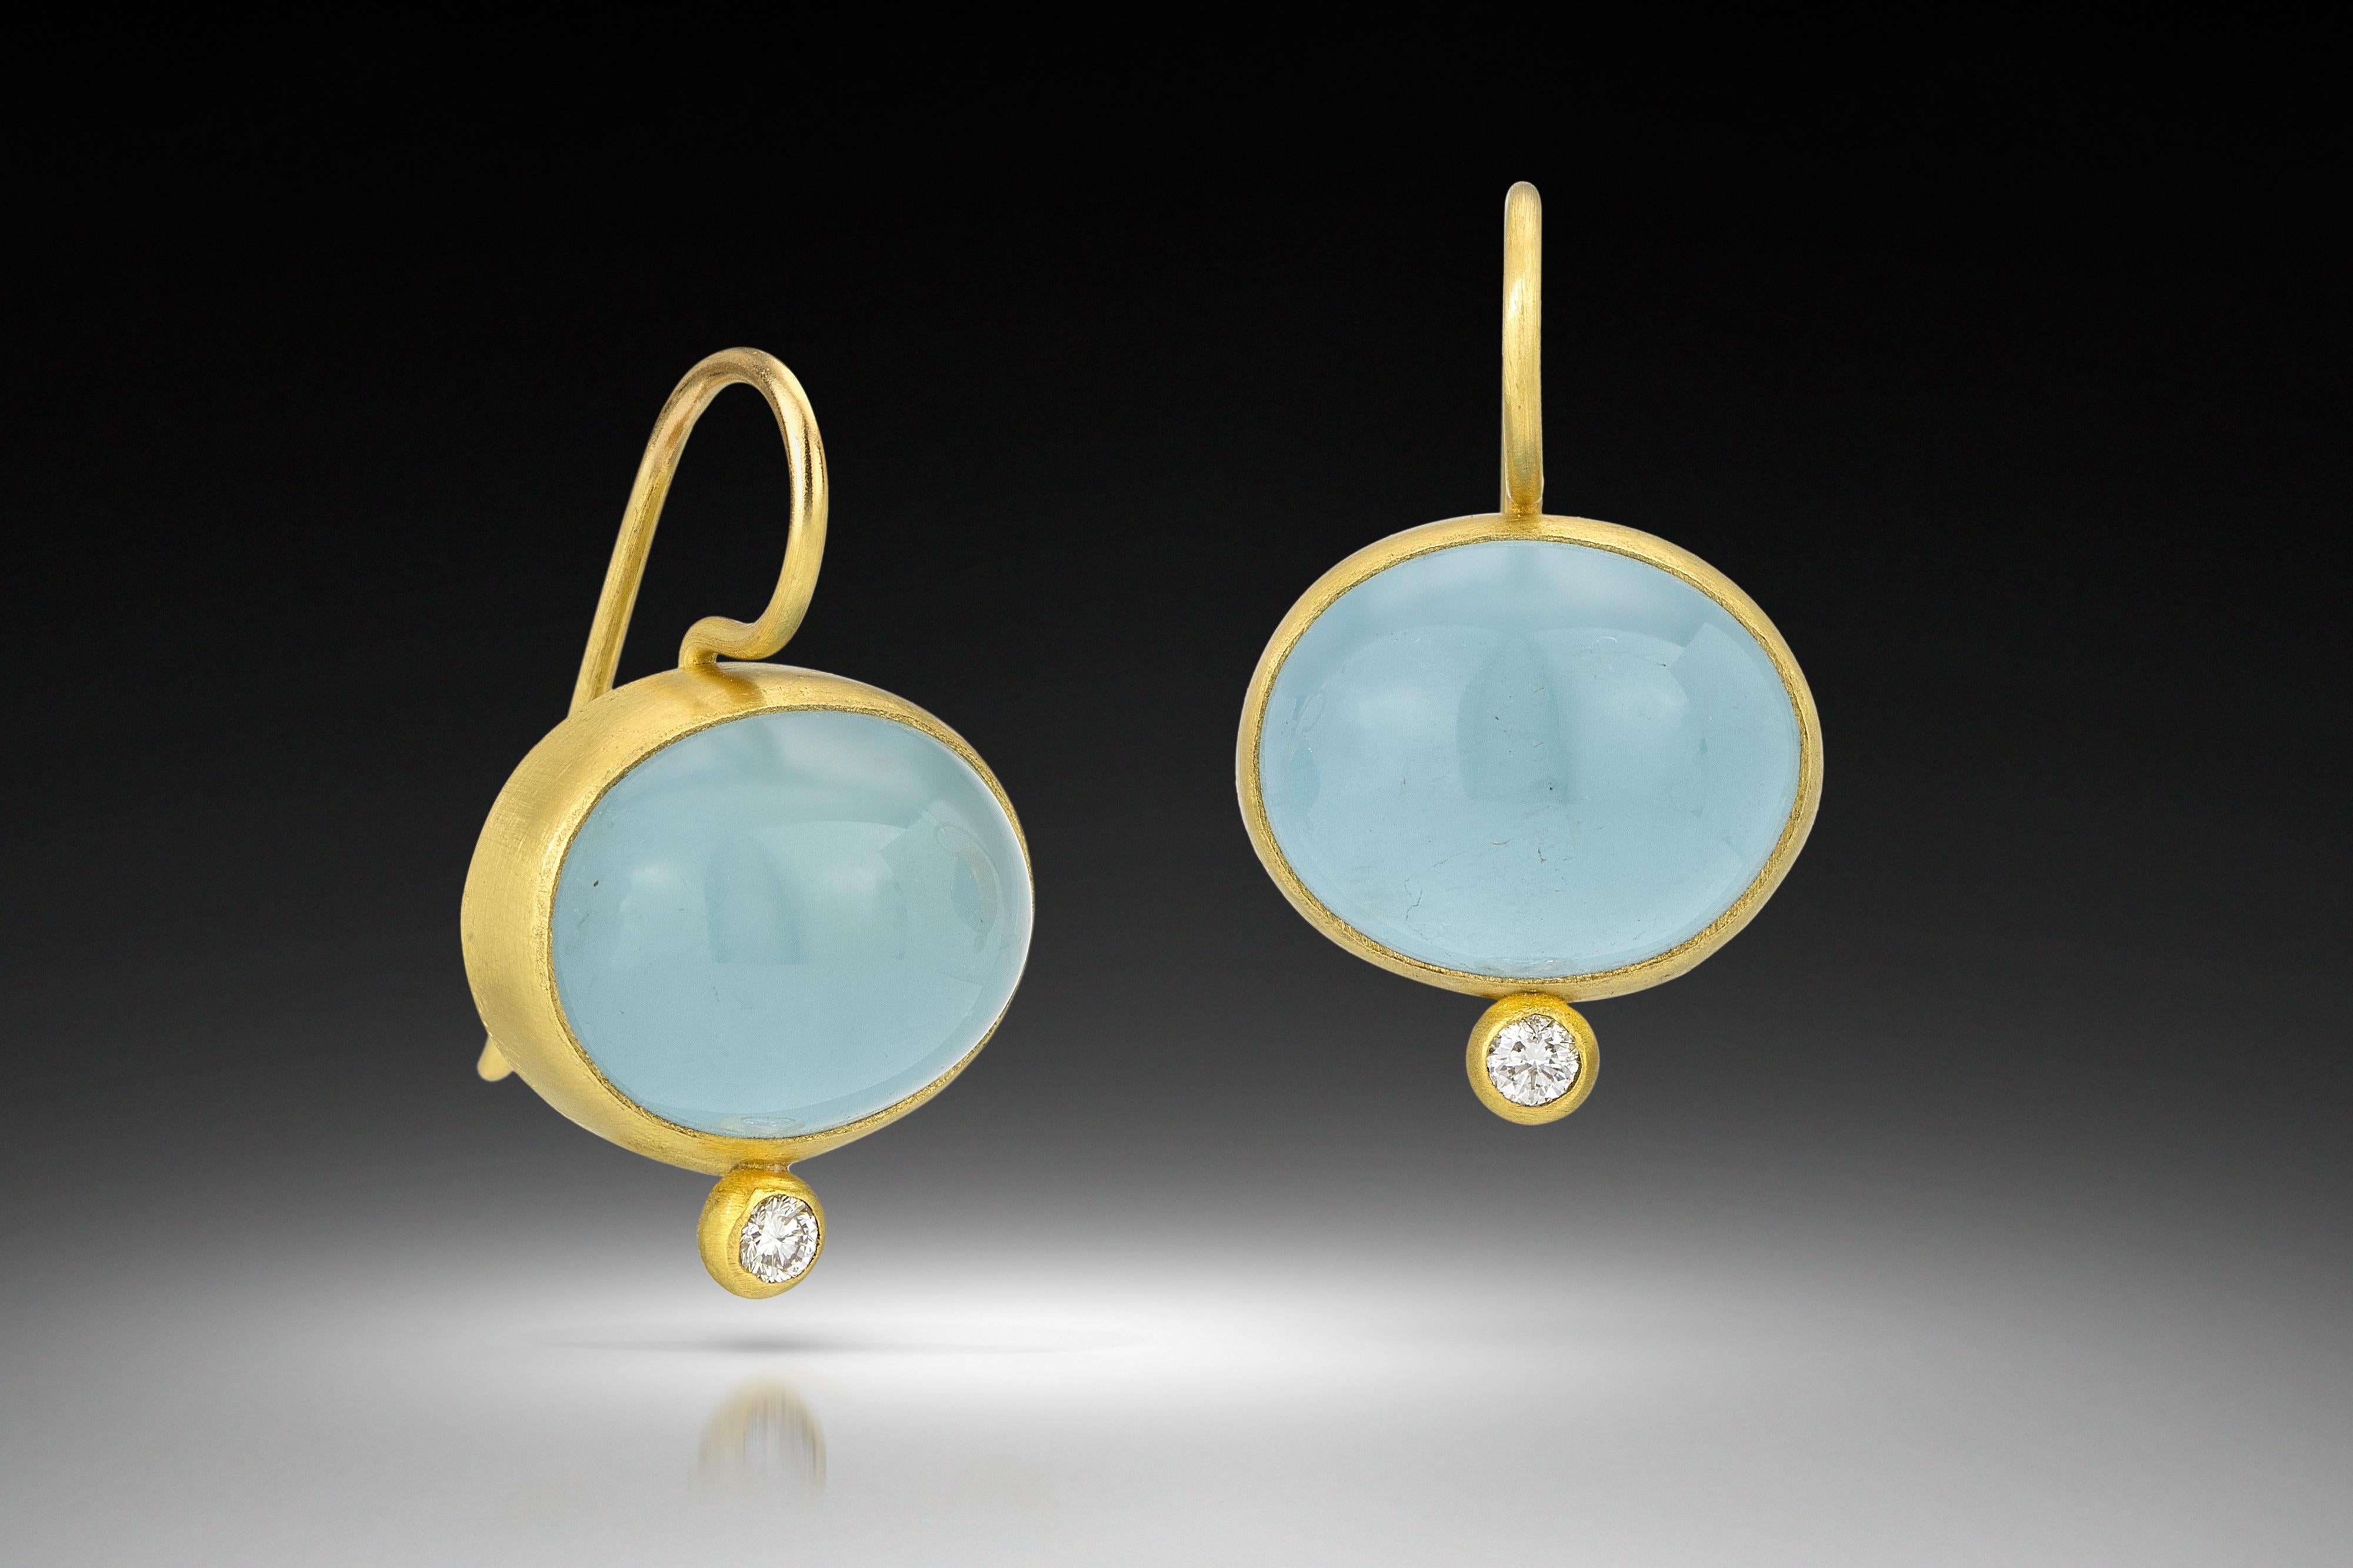 Stunning drop earring by Stephanie Albertson featuring 24.5 ct aquamarine oval cabochon, .10 ct diamond dot accents and French earwires. Designed to sit just below the earlobe, these earrings are perfect to wear every day or dress up for an evening